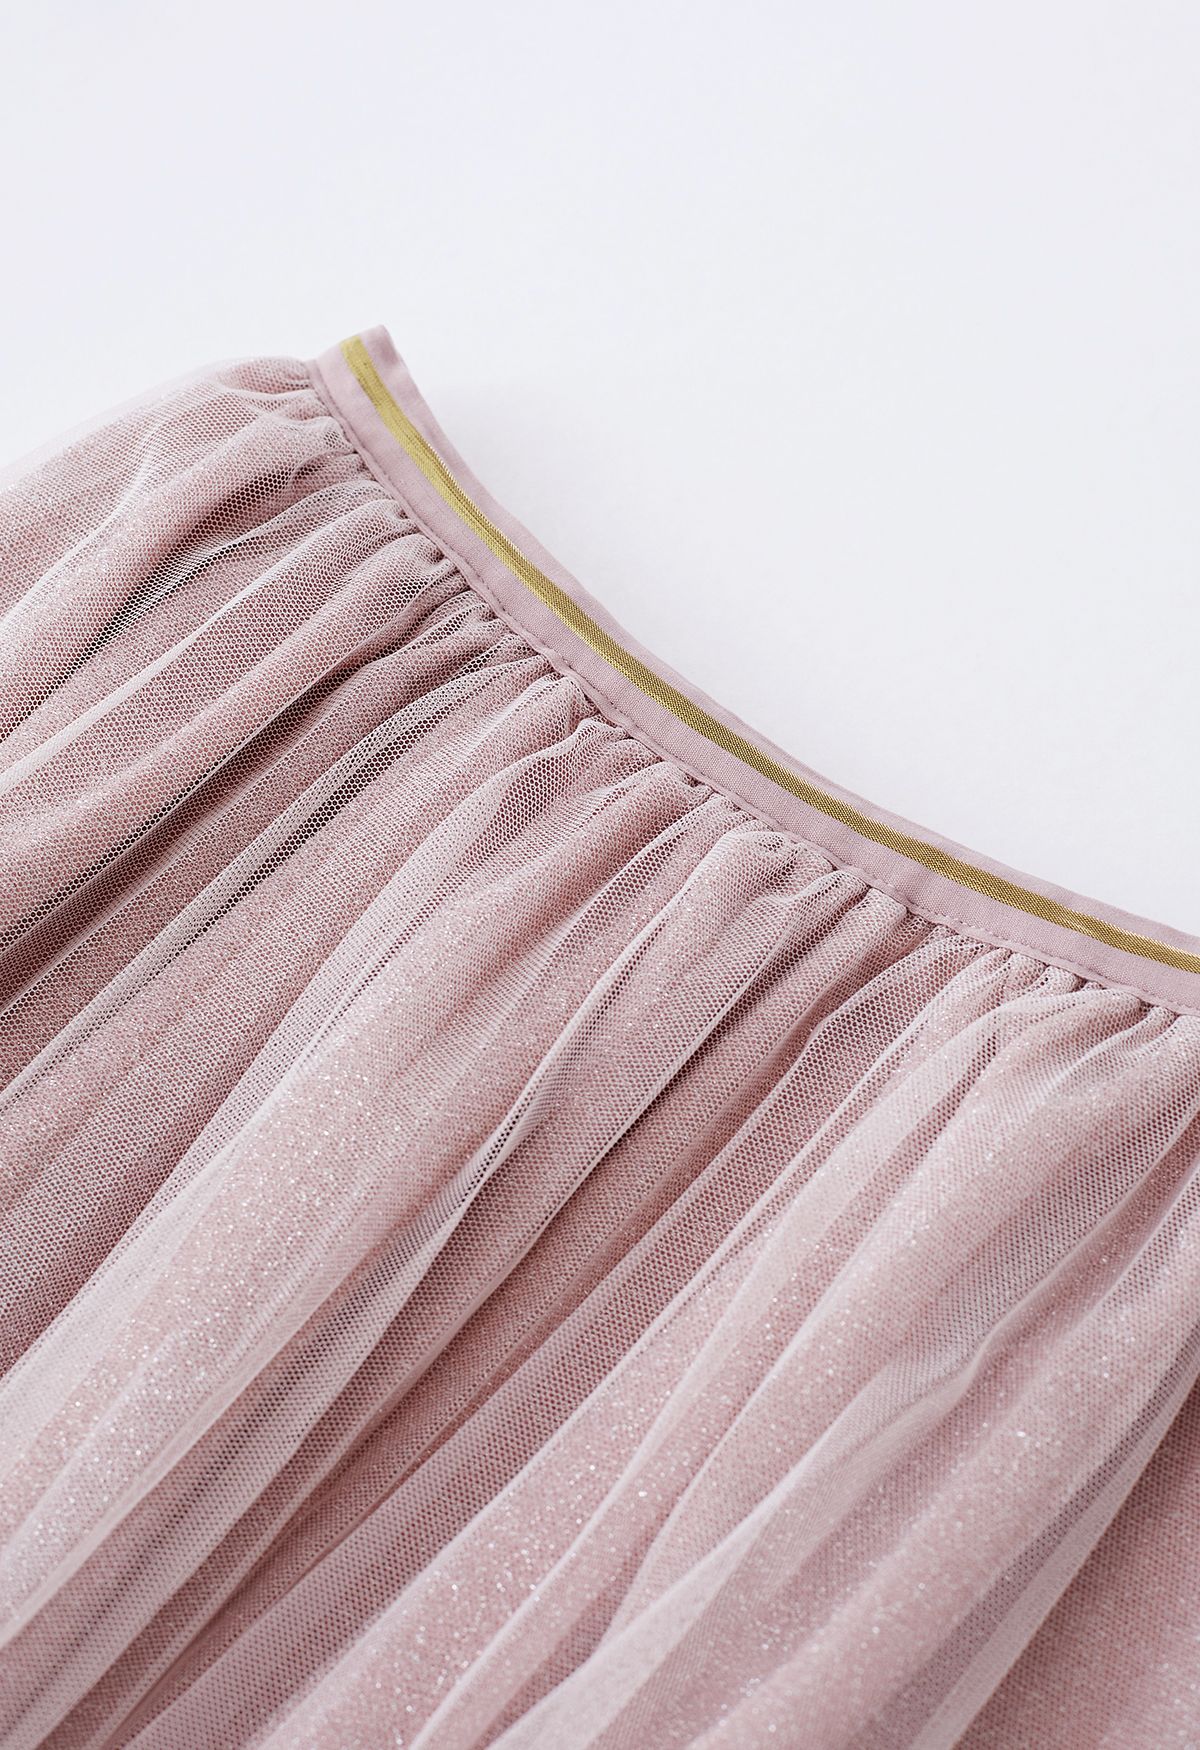 Glimmering Pleated Mesh Midi Skirt in Pink